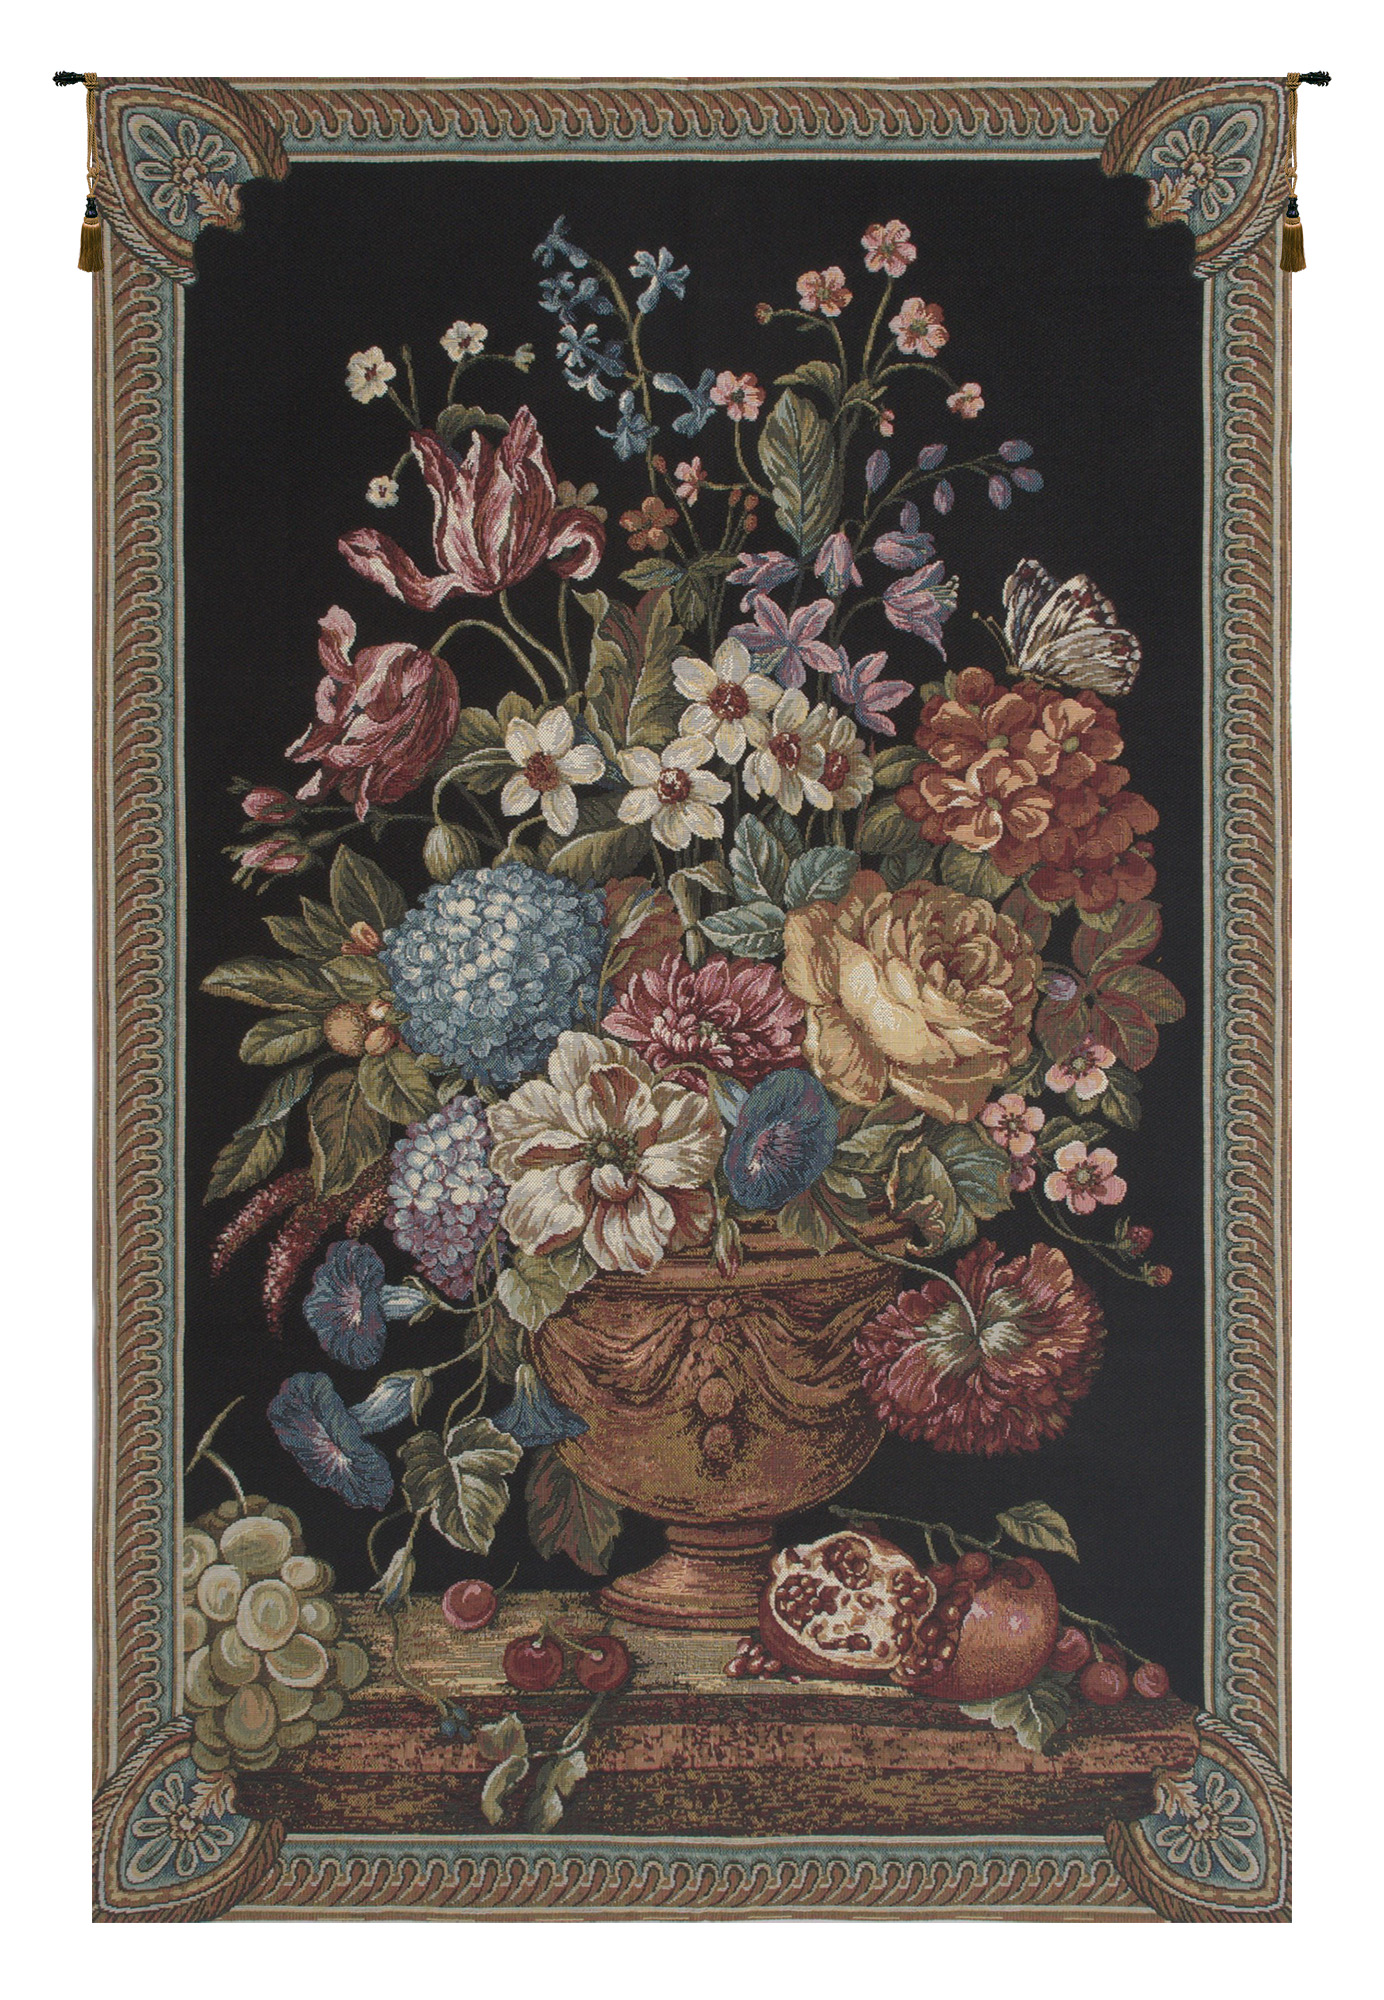 Floral Bouquet Thoughts by Lucio Battisti European Tapestries